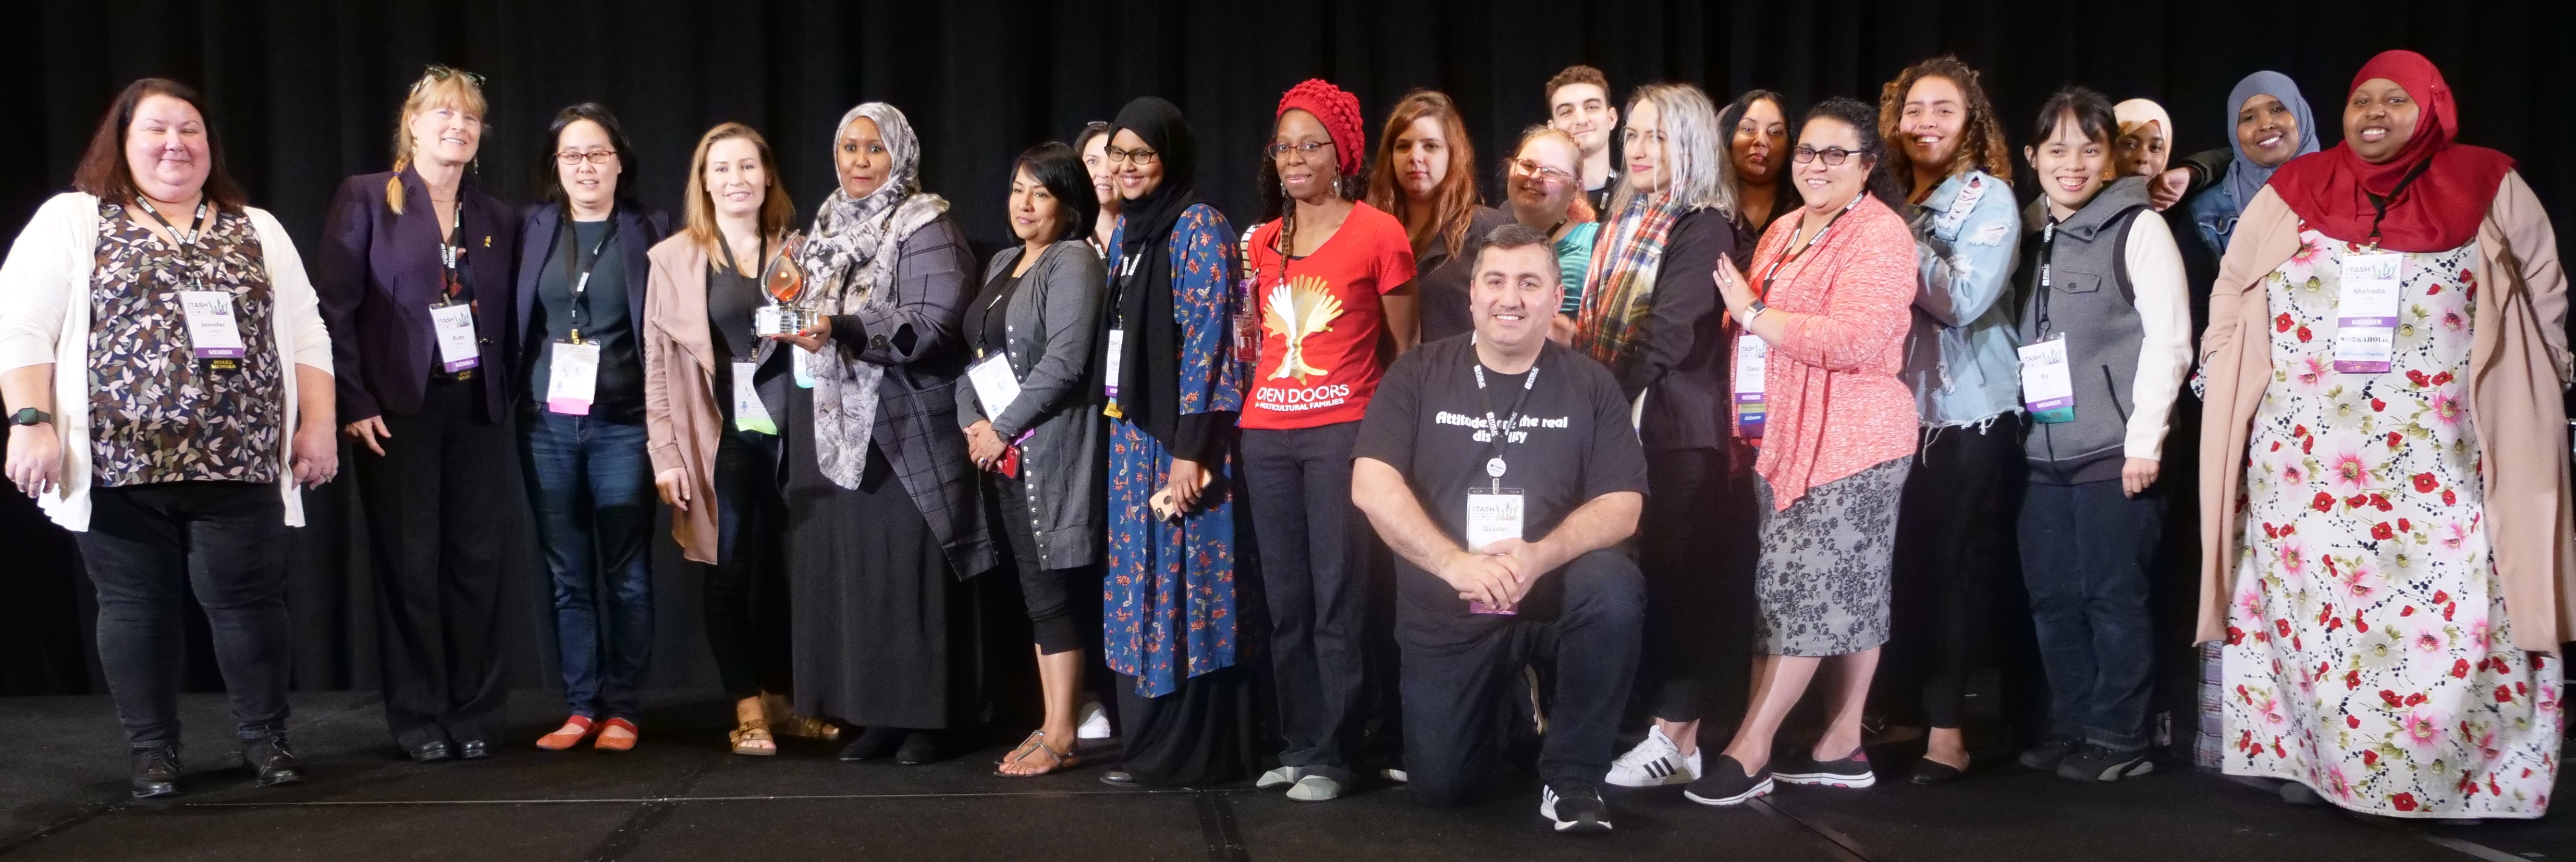 A photograph of the Open Doors for Multicultural Families delegation accepting the Ralph Edwards Diversity and Social Impact Award for Ginger Kwan. A large, diverse group of people wearing casual and professional outfits and head-coverings from multiple cultures.